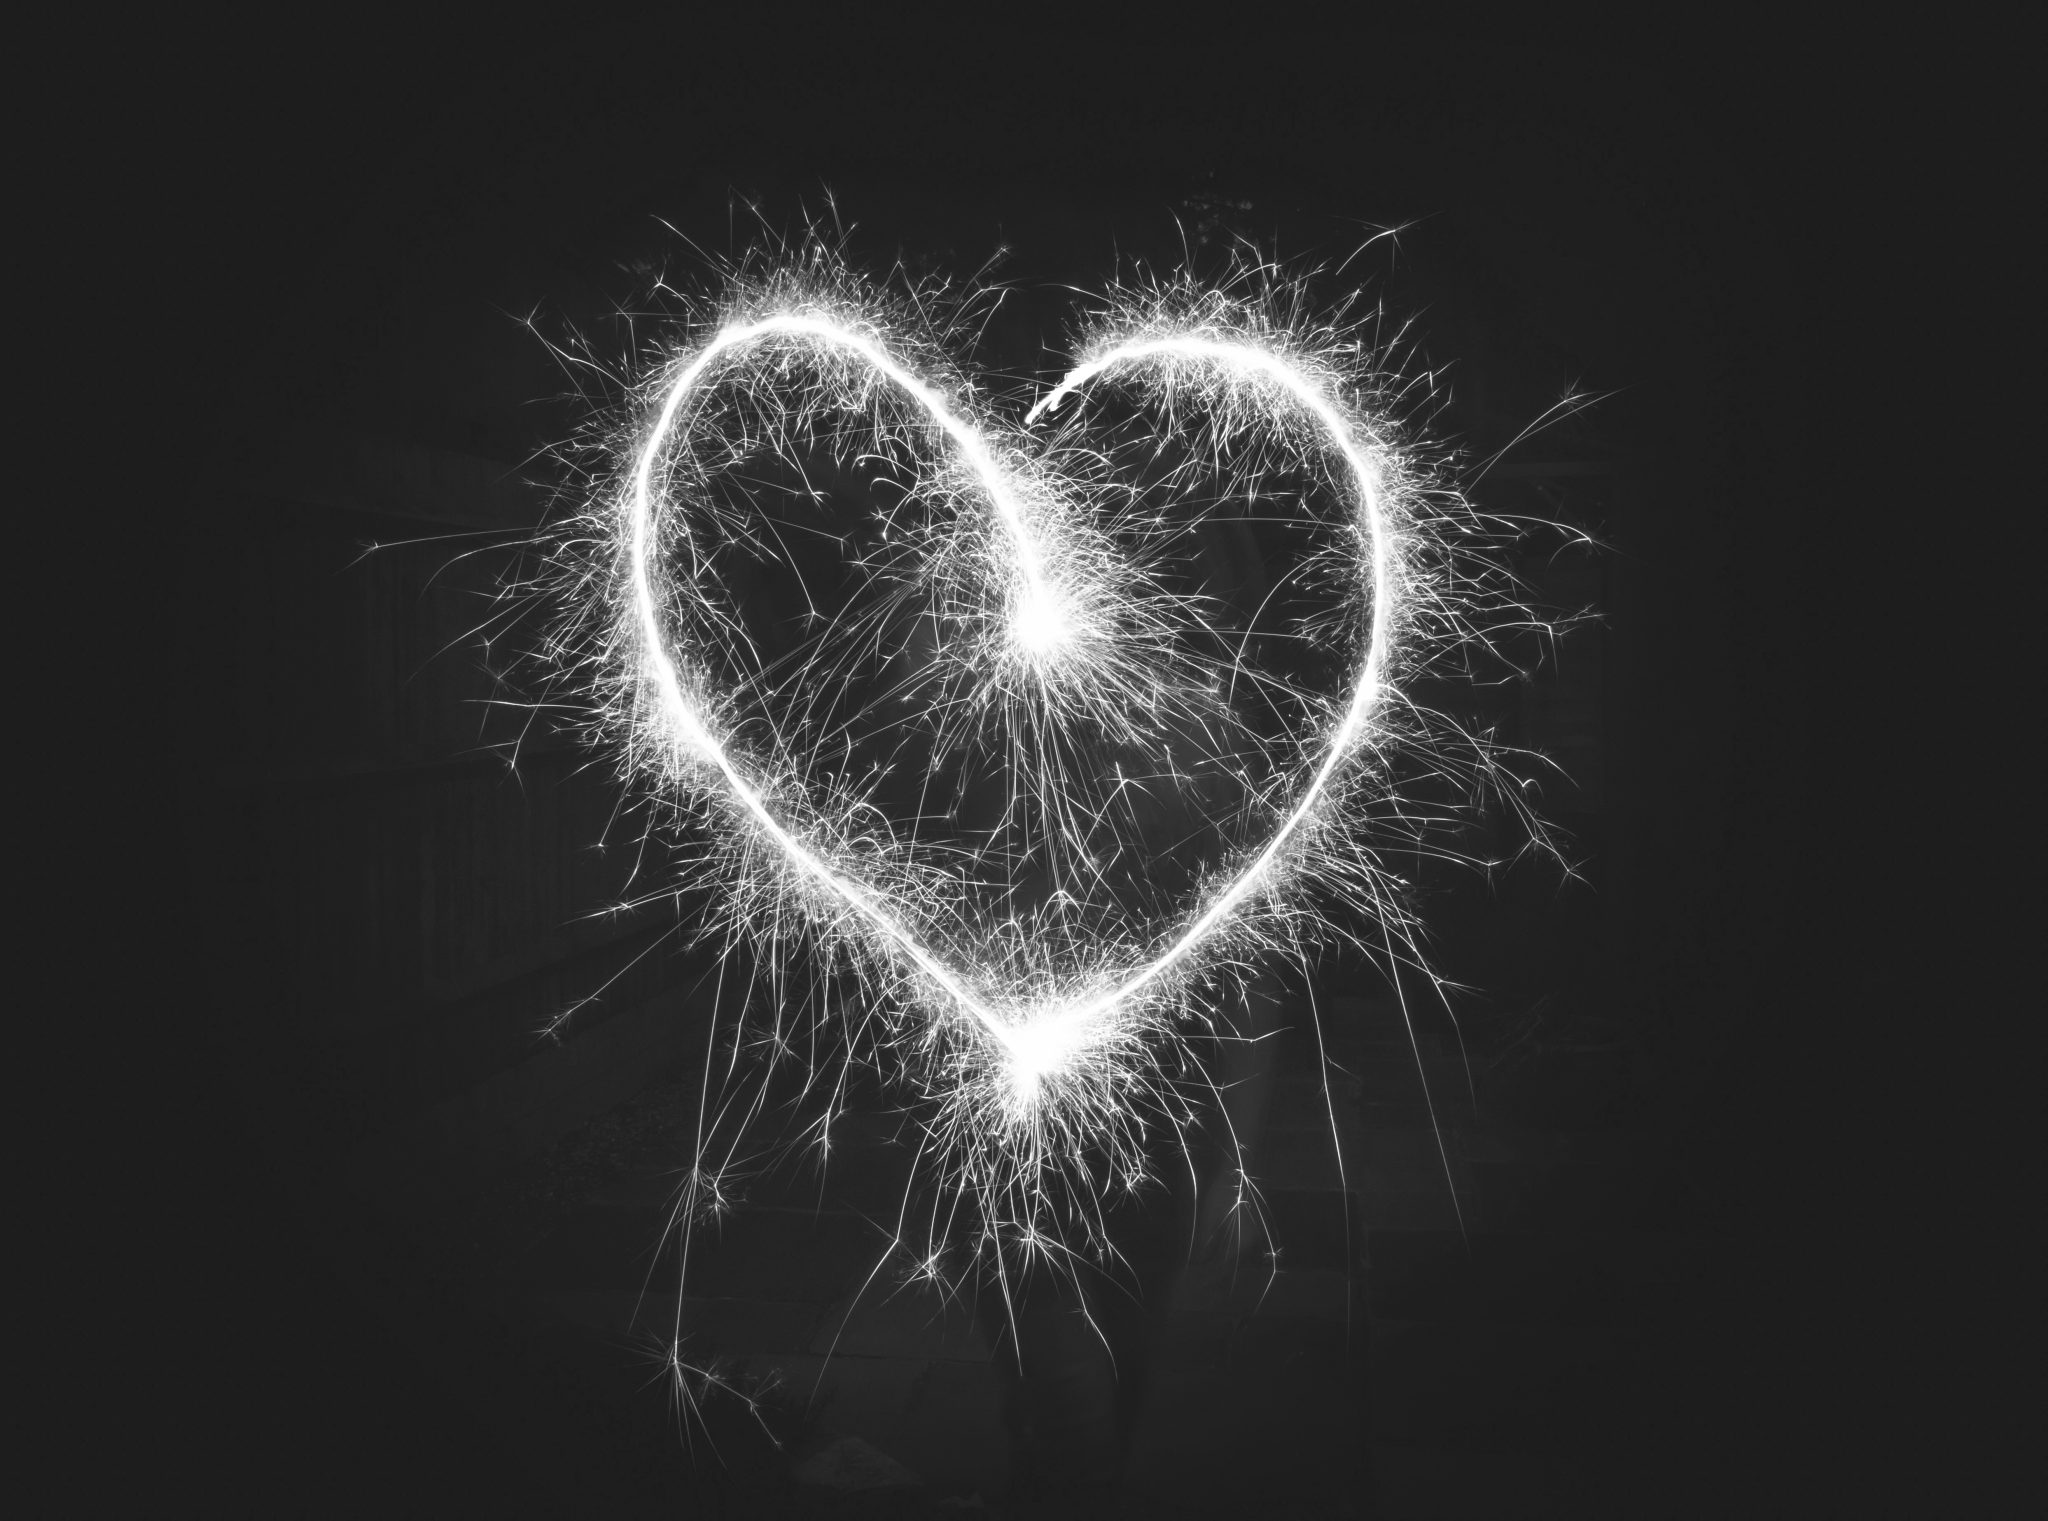 heart shaped sparklers illustrating valentines day sending in South Africa